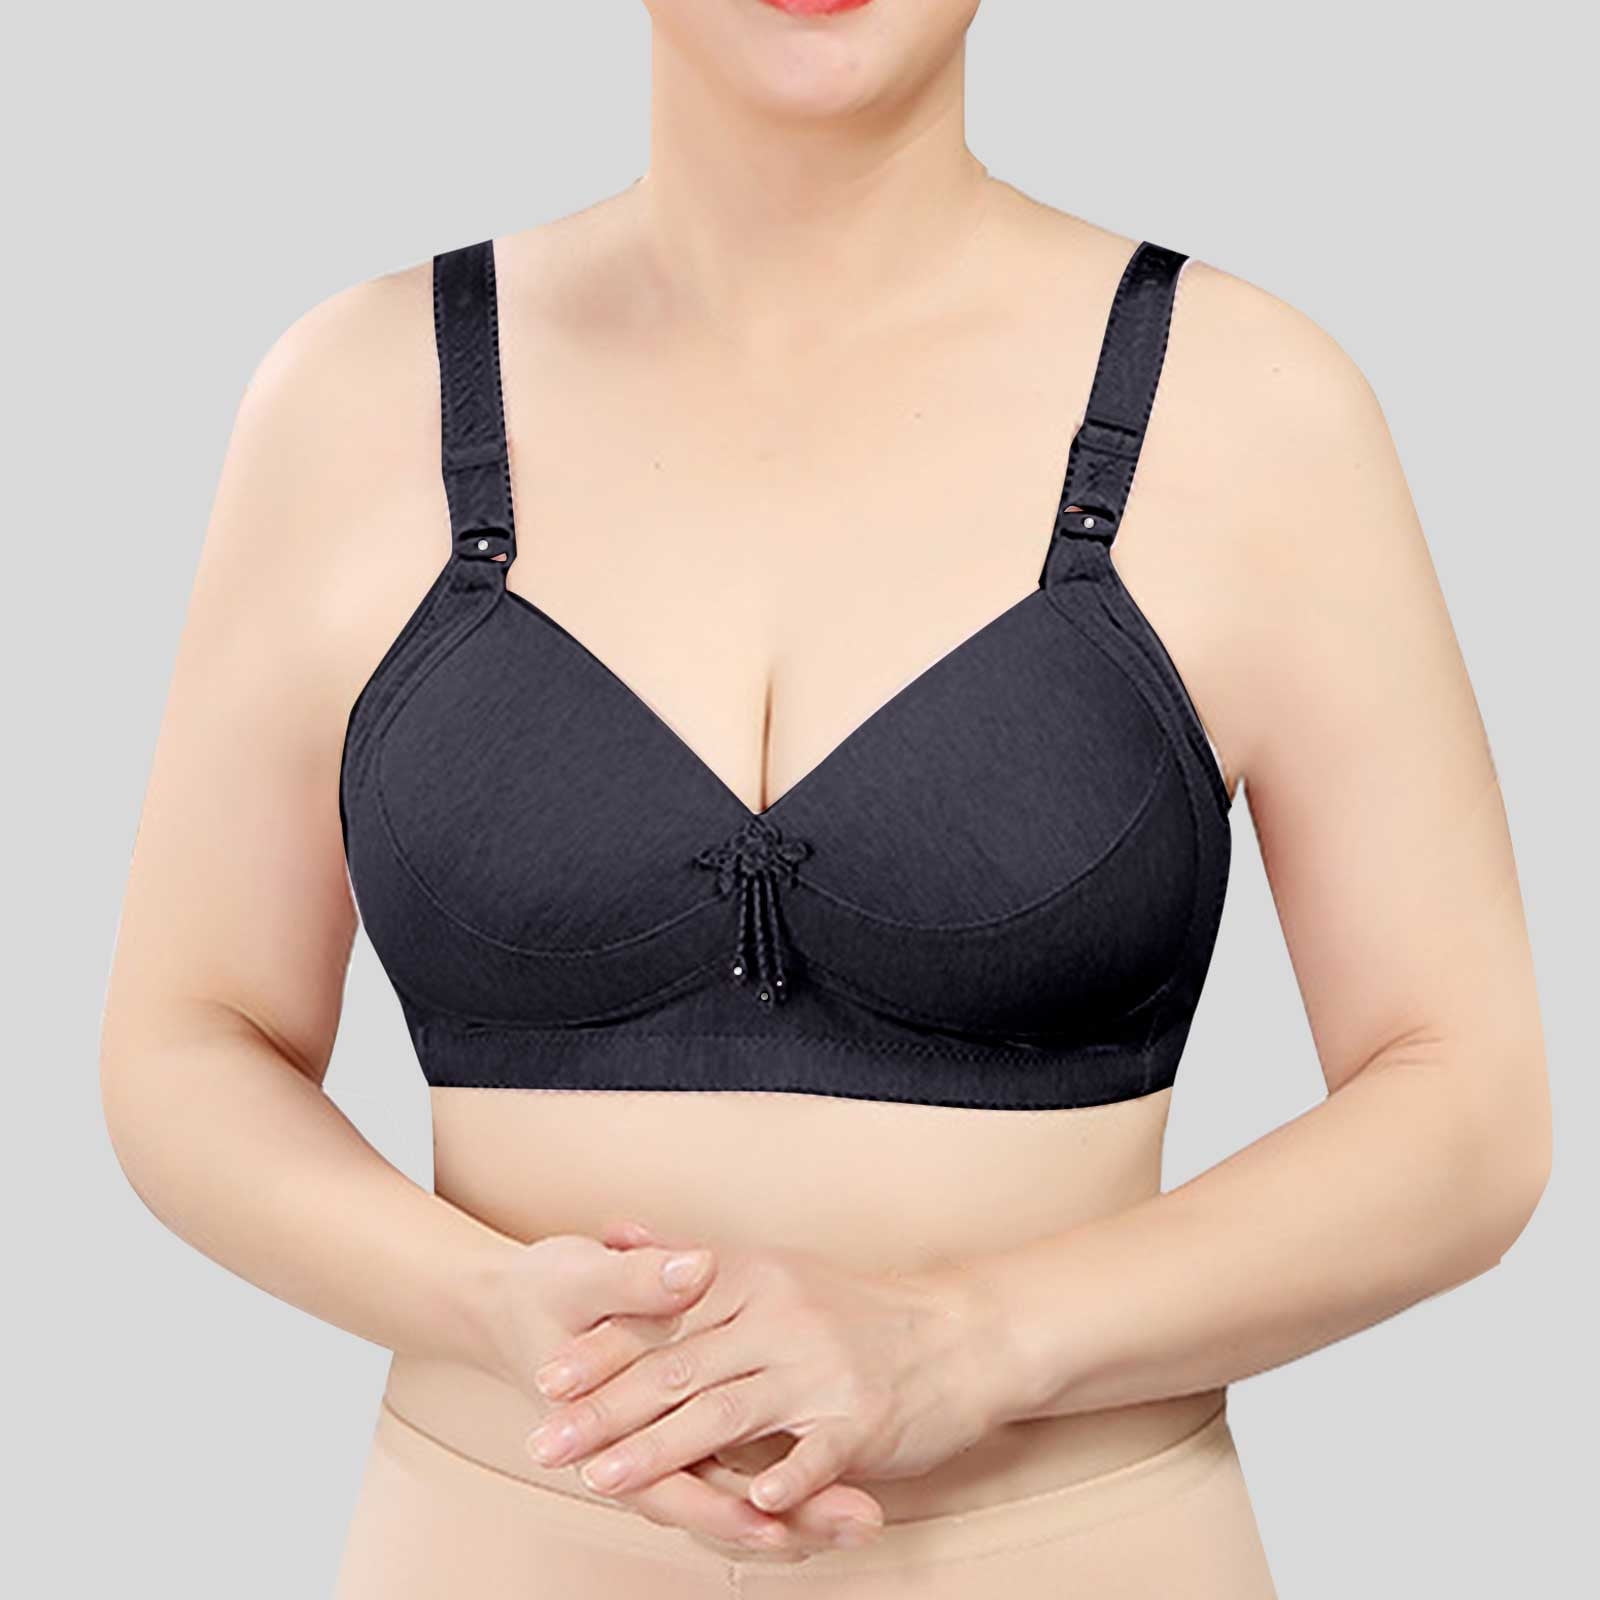 Aueoeo Support Bras for Women Full Coverage and Lift, Sports Bra